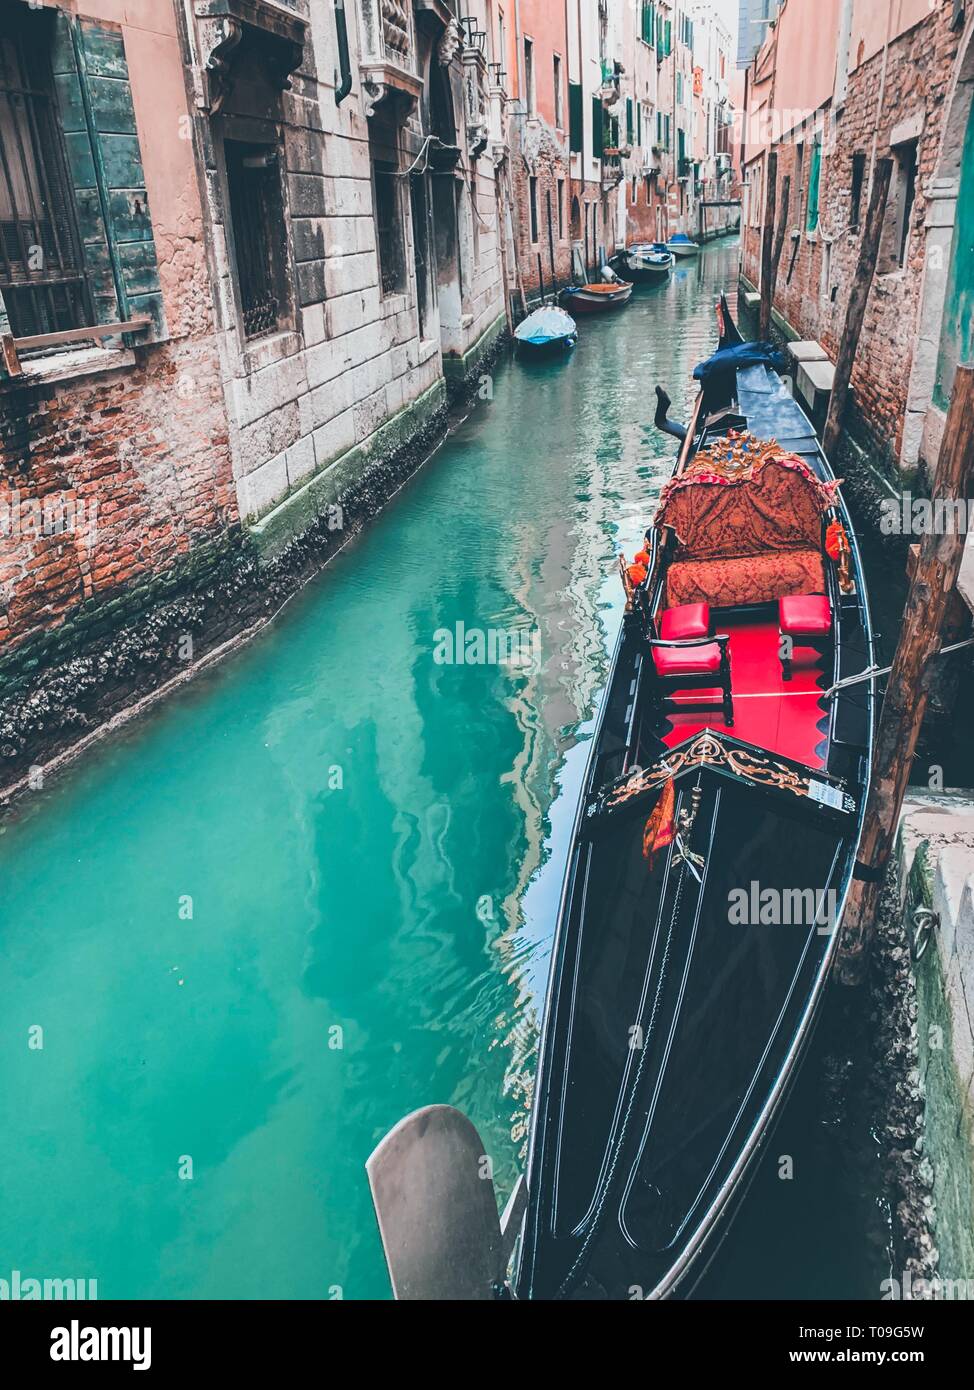 Classical picture of the venetian canals with gondola across the canal. Stock Photo